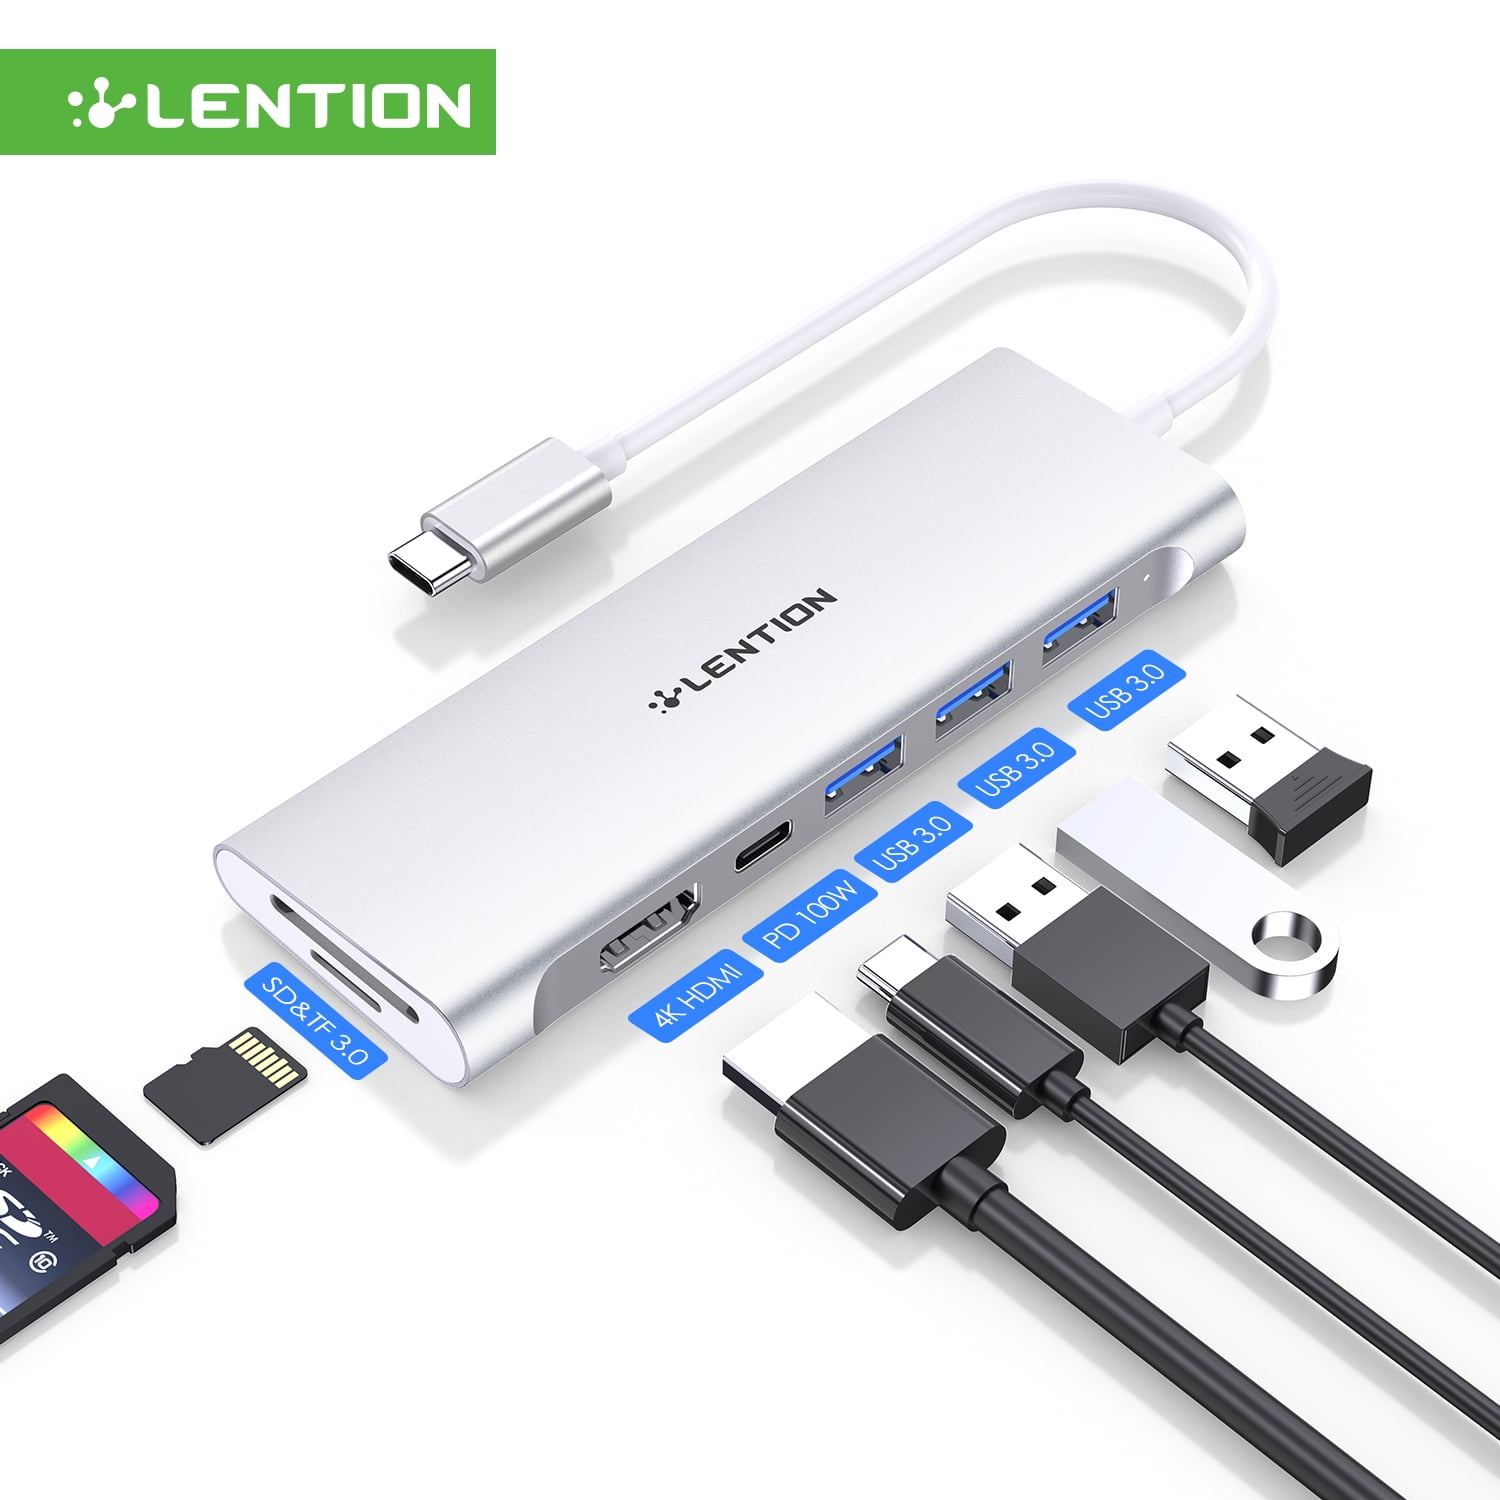 UGREEN USB C Hub 6 in 1 Type C to HDMI 4K, 2 USB 3.0 Ports, SD TF Card  Reader, 100W PD Charging Adapter Dock Station for MacBook Pro Air 2020 2019